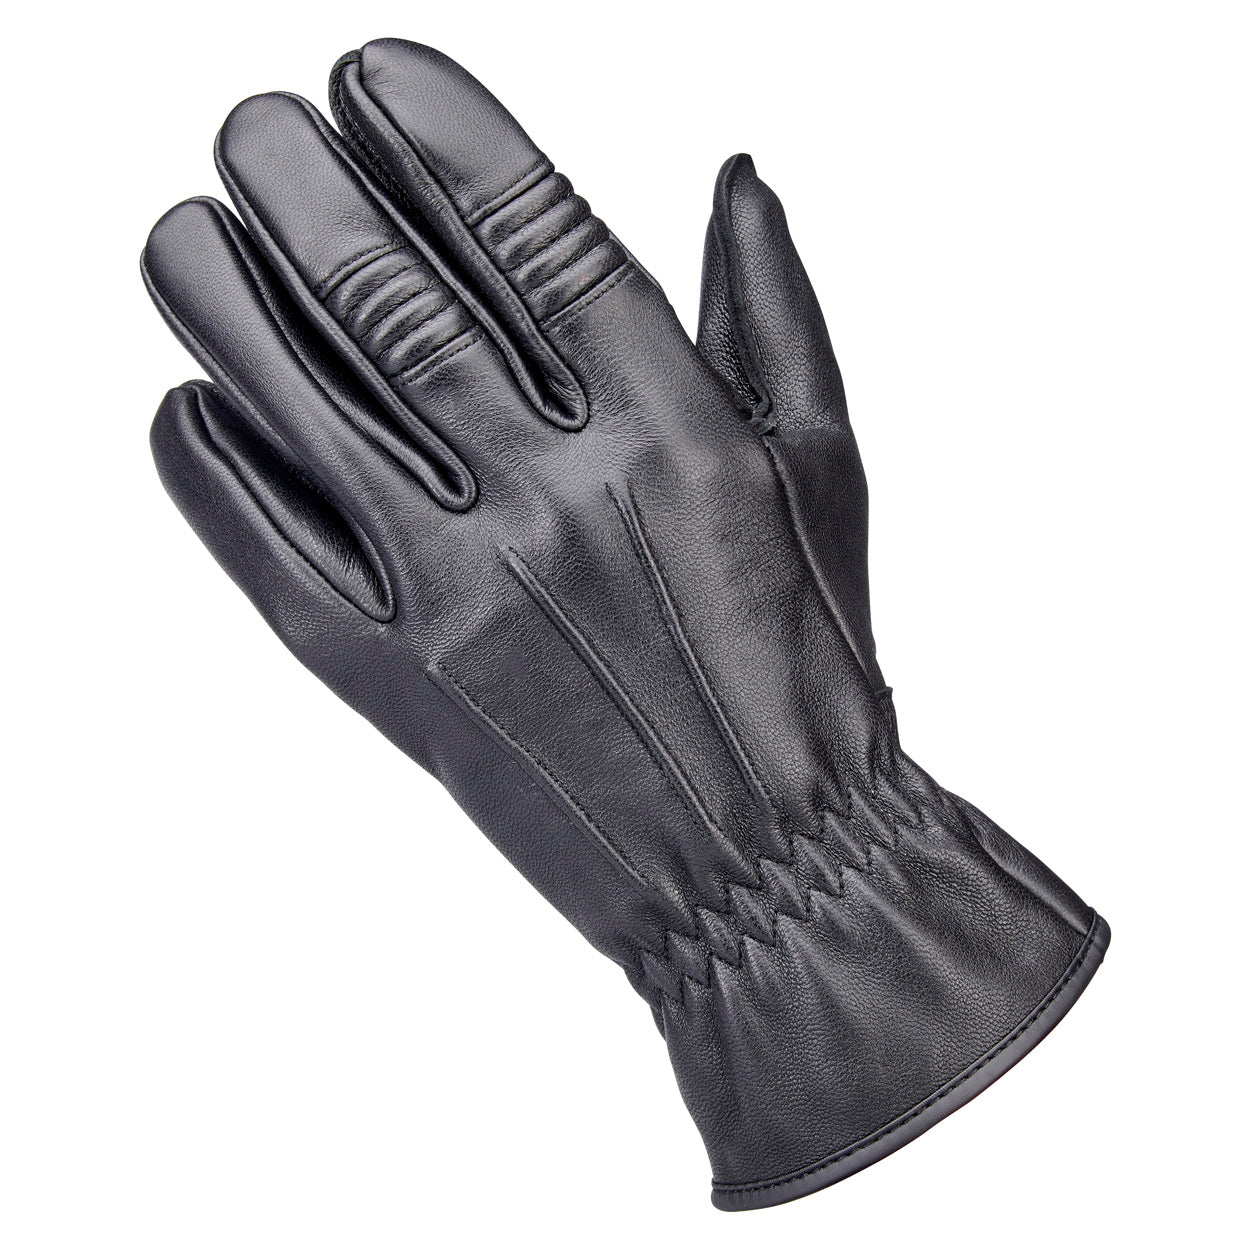 Leather Work Gloves